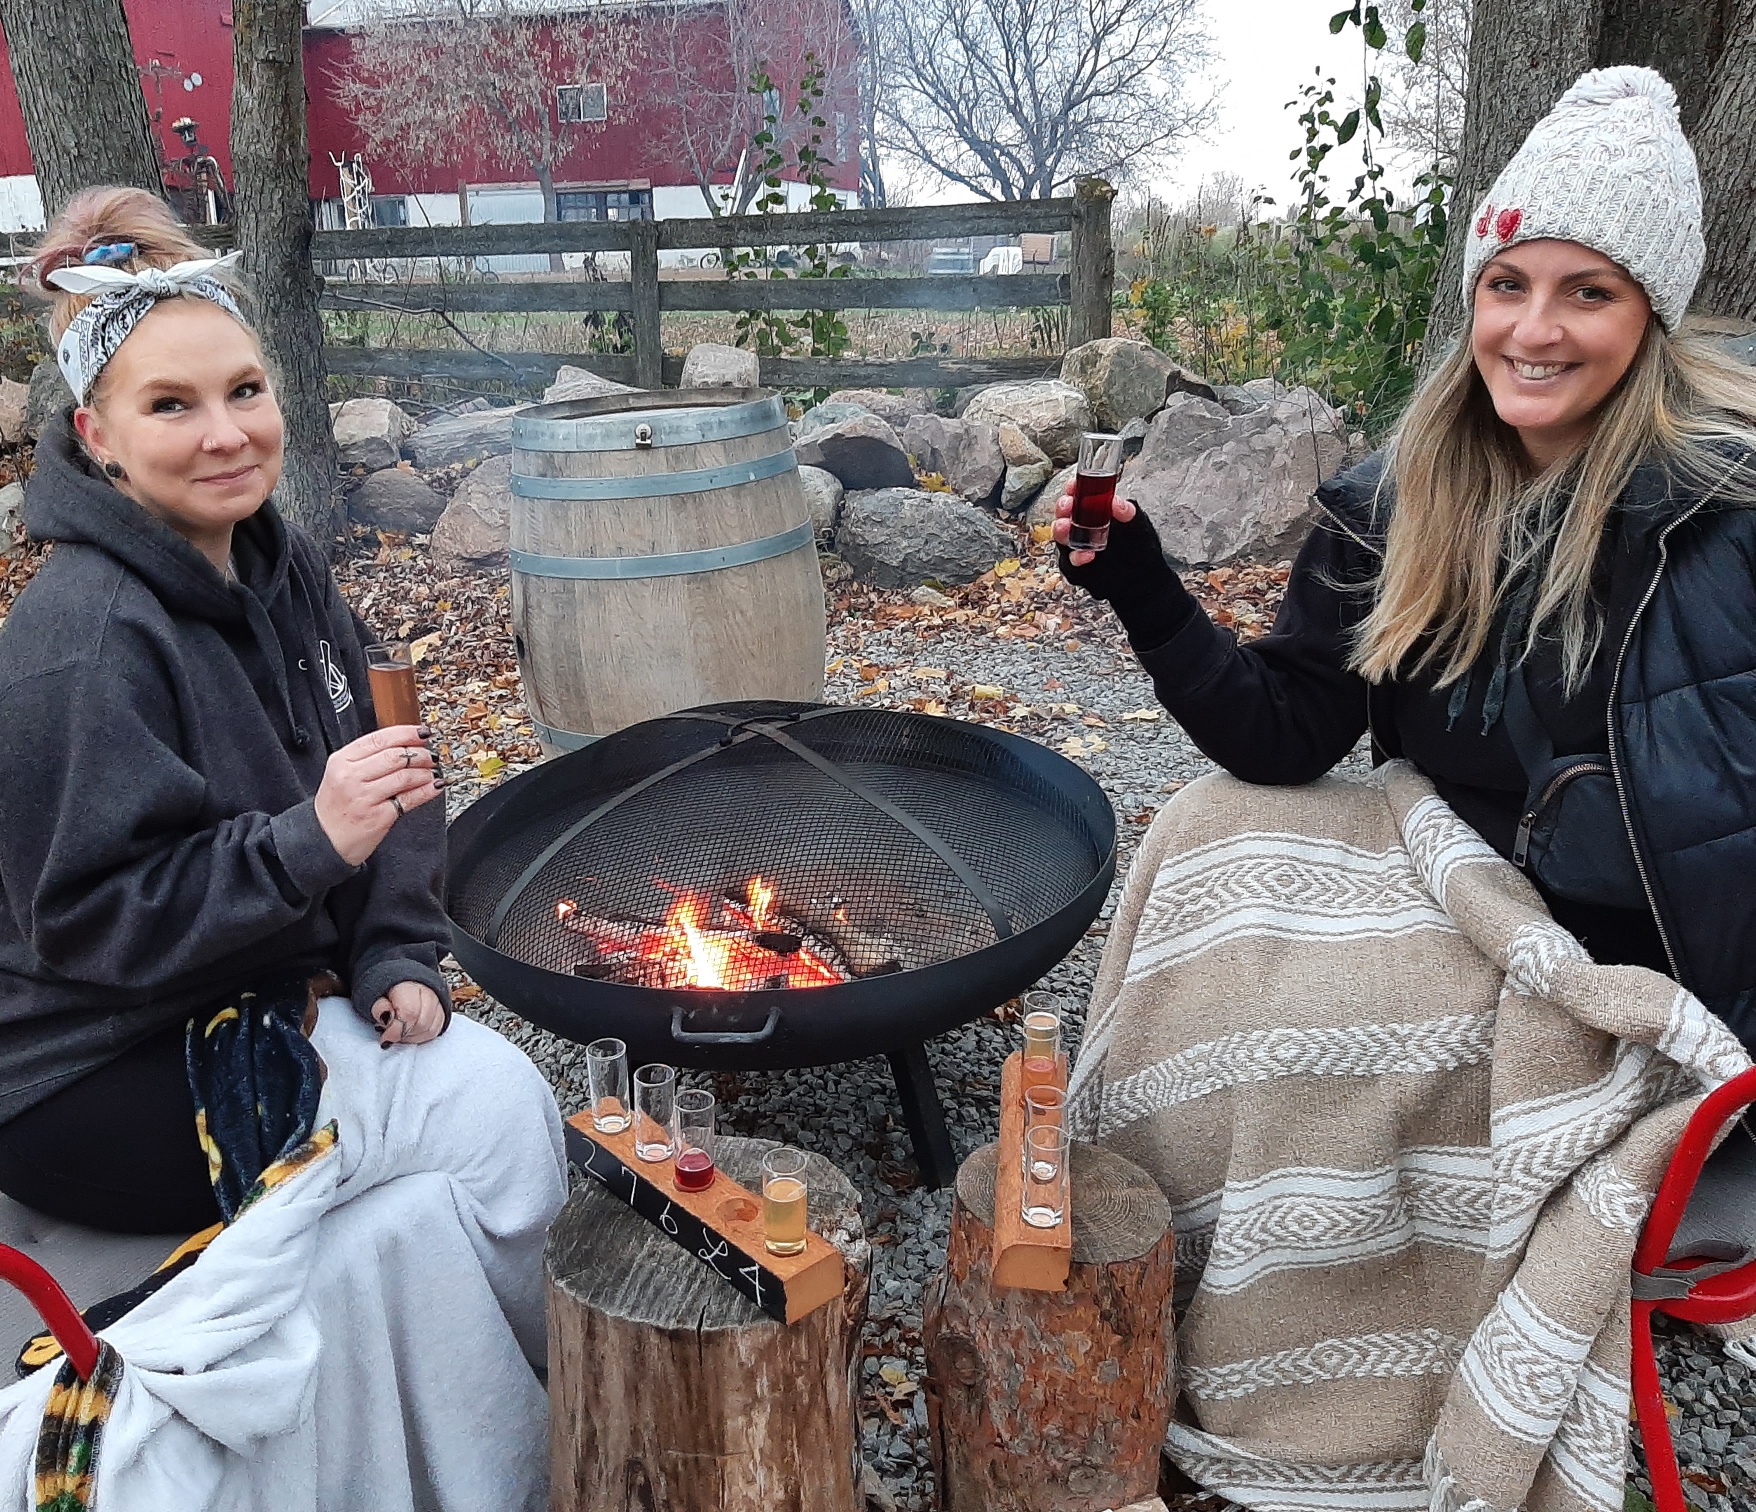 Two people sitting by a fire pit with blankets and a flight of Banjo cider